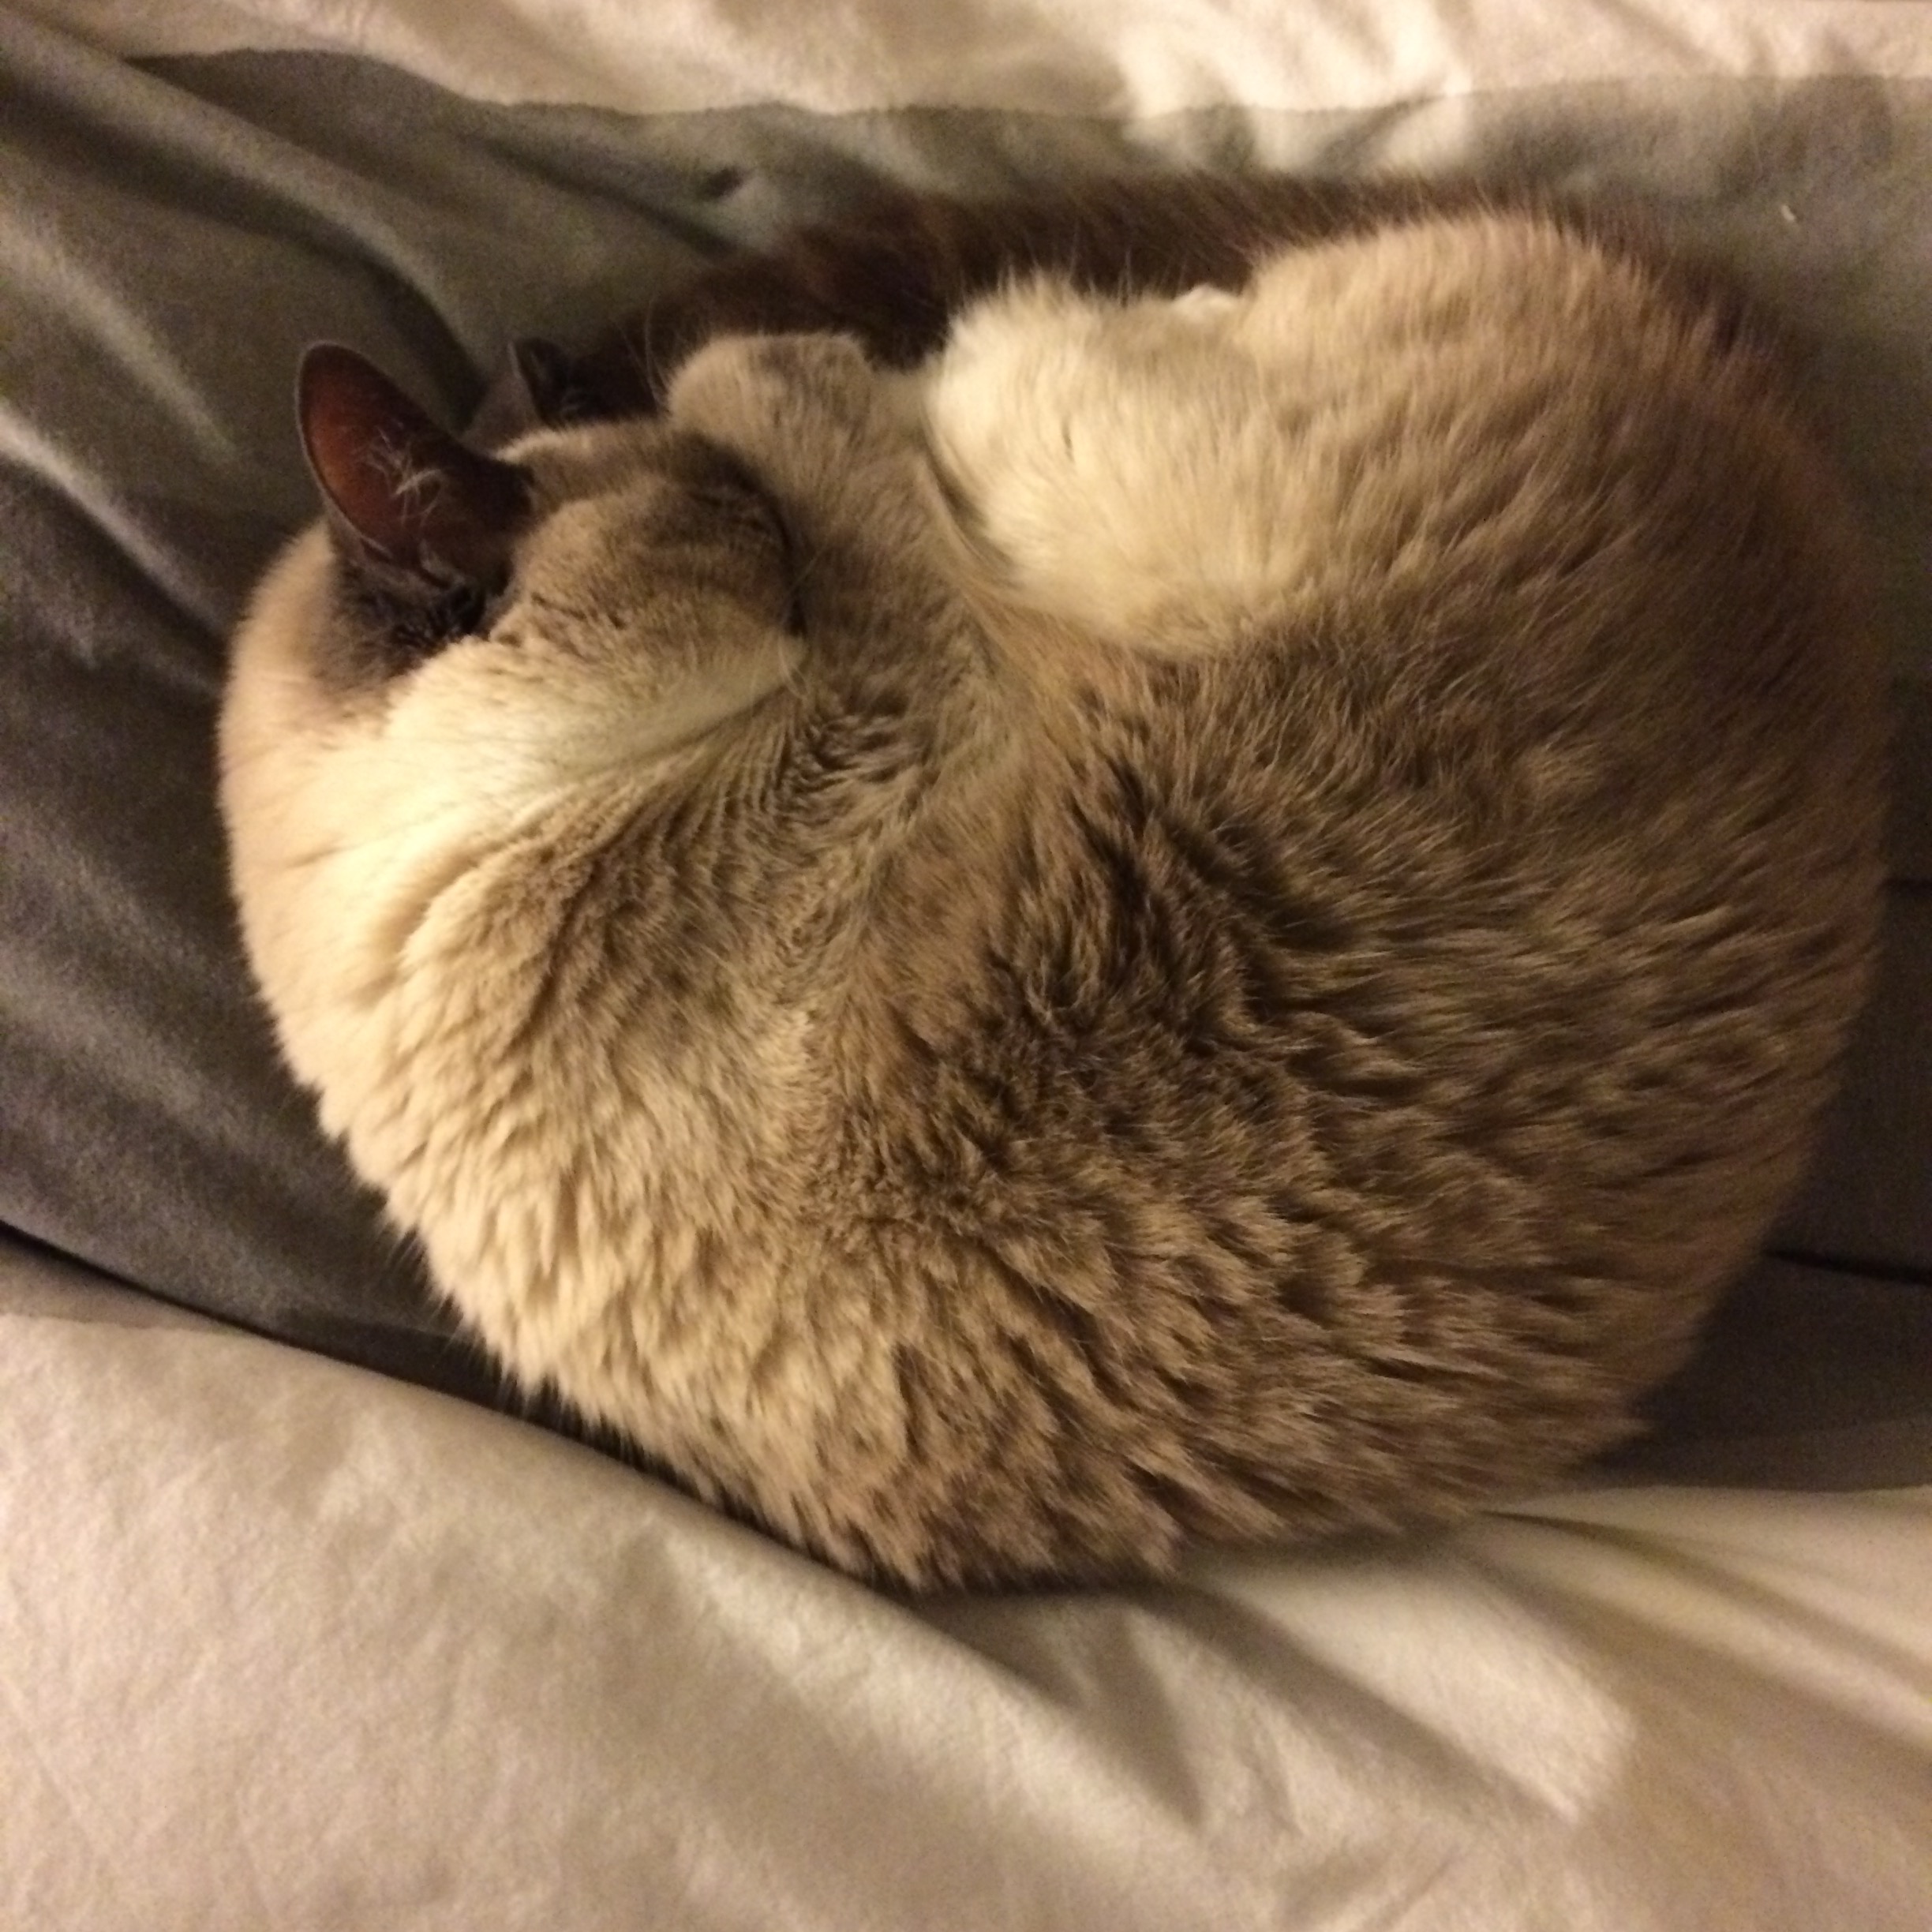 Siamese cat curled up on itself, head tucked under paw, in a neat circle.